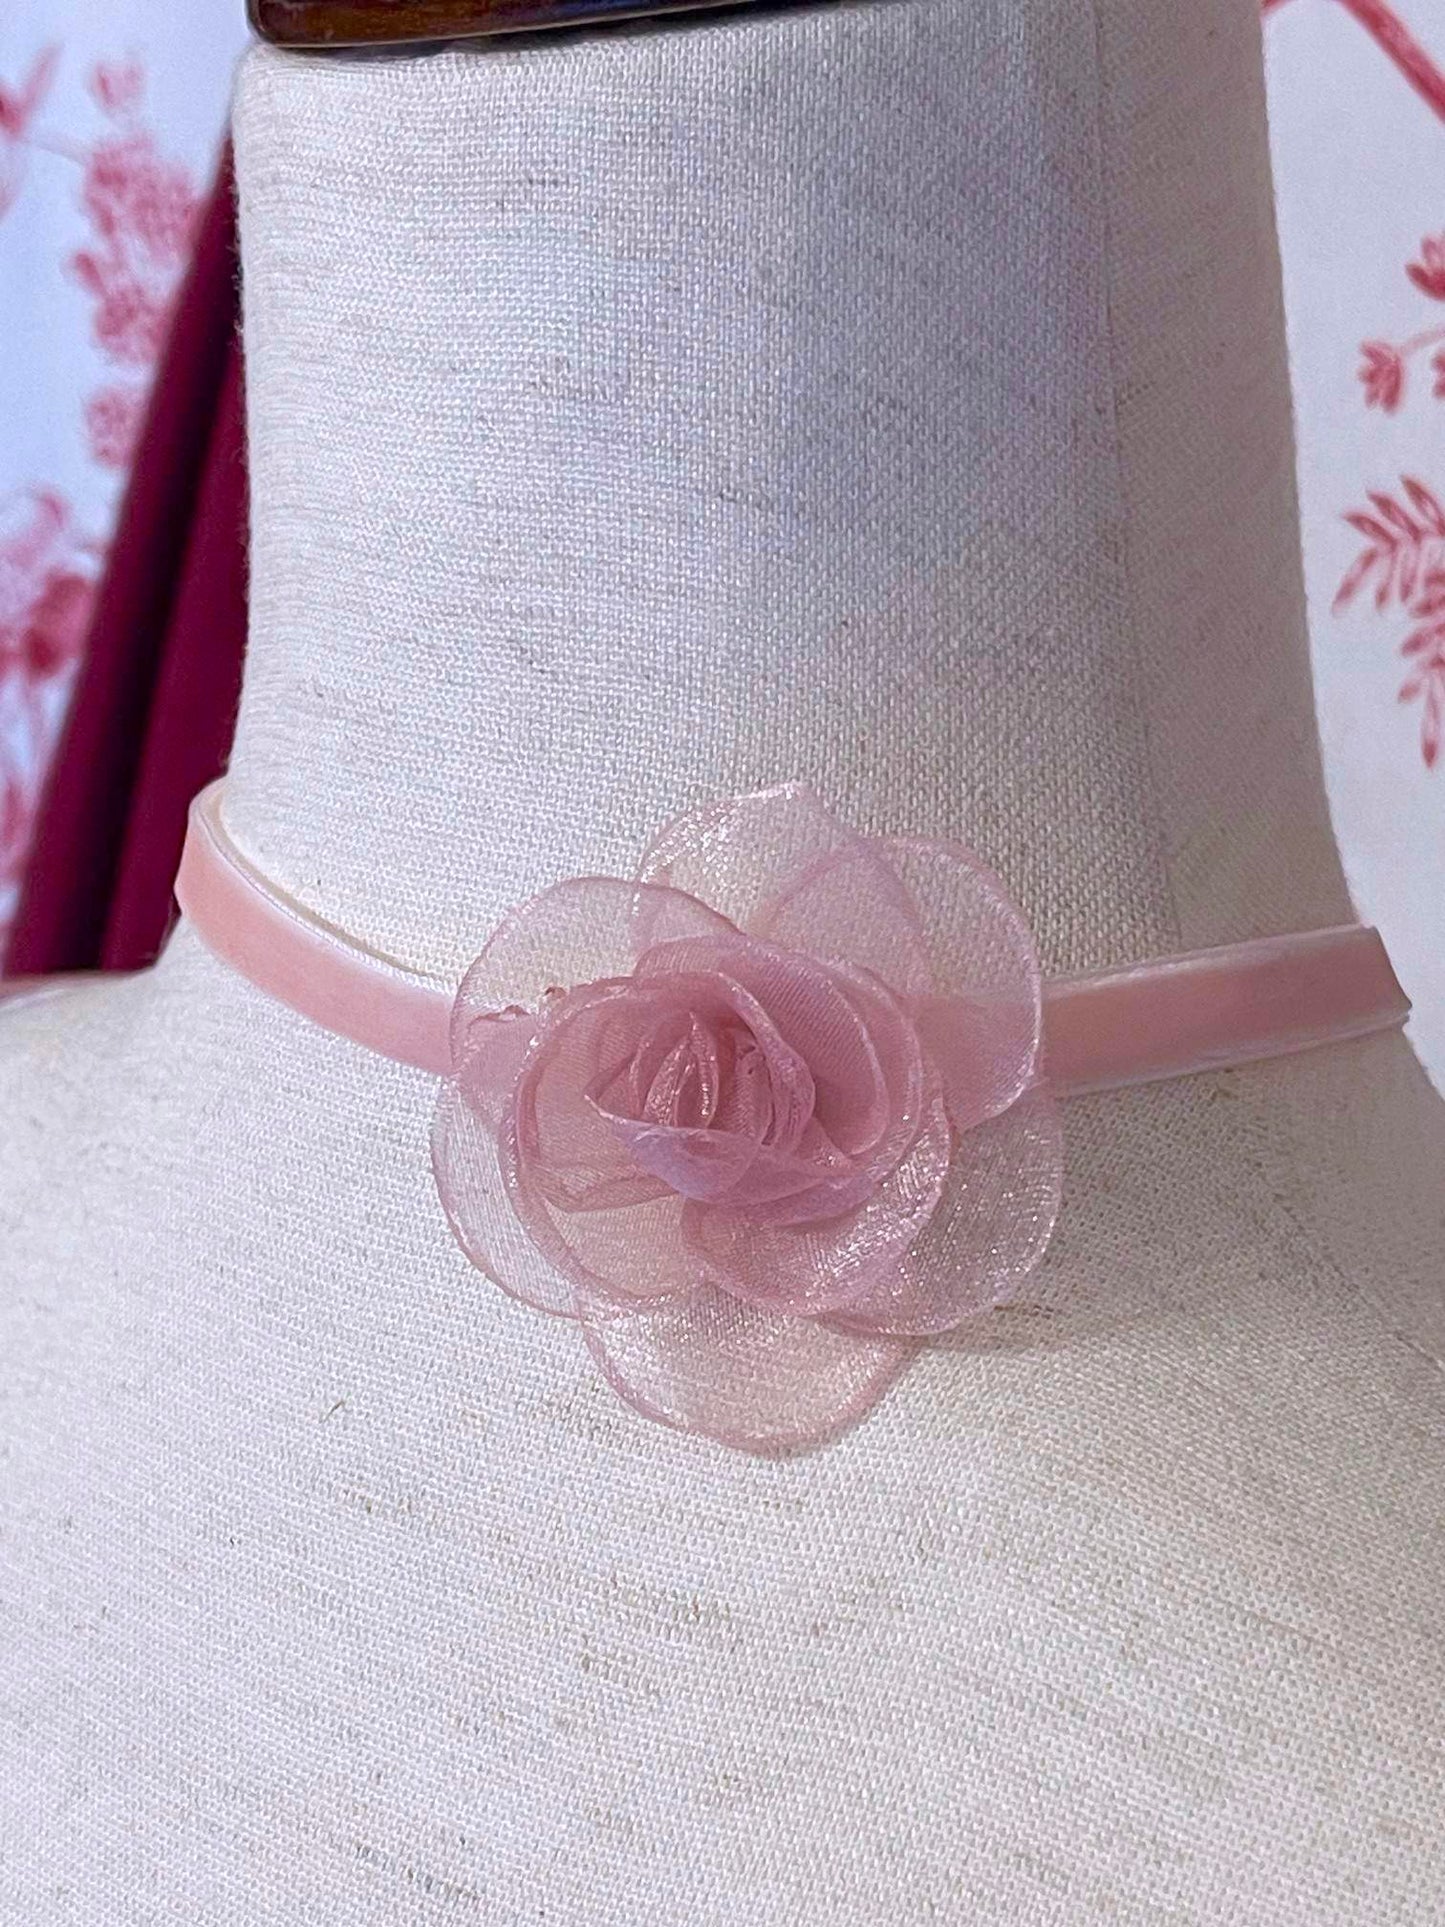 A Historically Inspired Velvet Ribbon Rosette Choker Necklace in Ballerina Pink, with claw clasp closure.